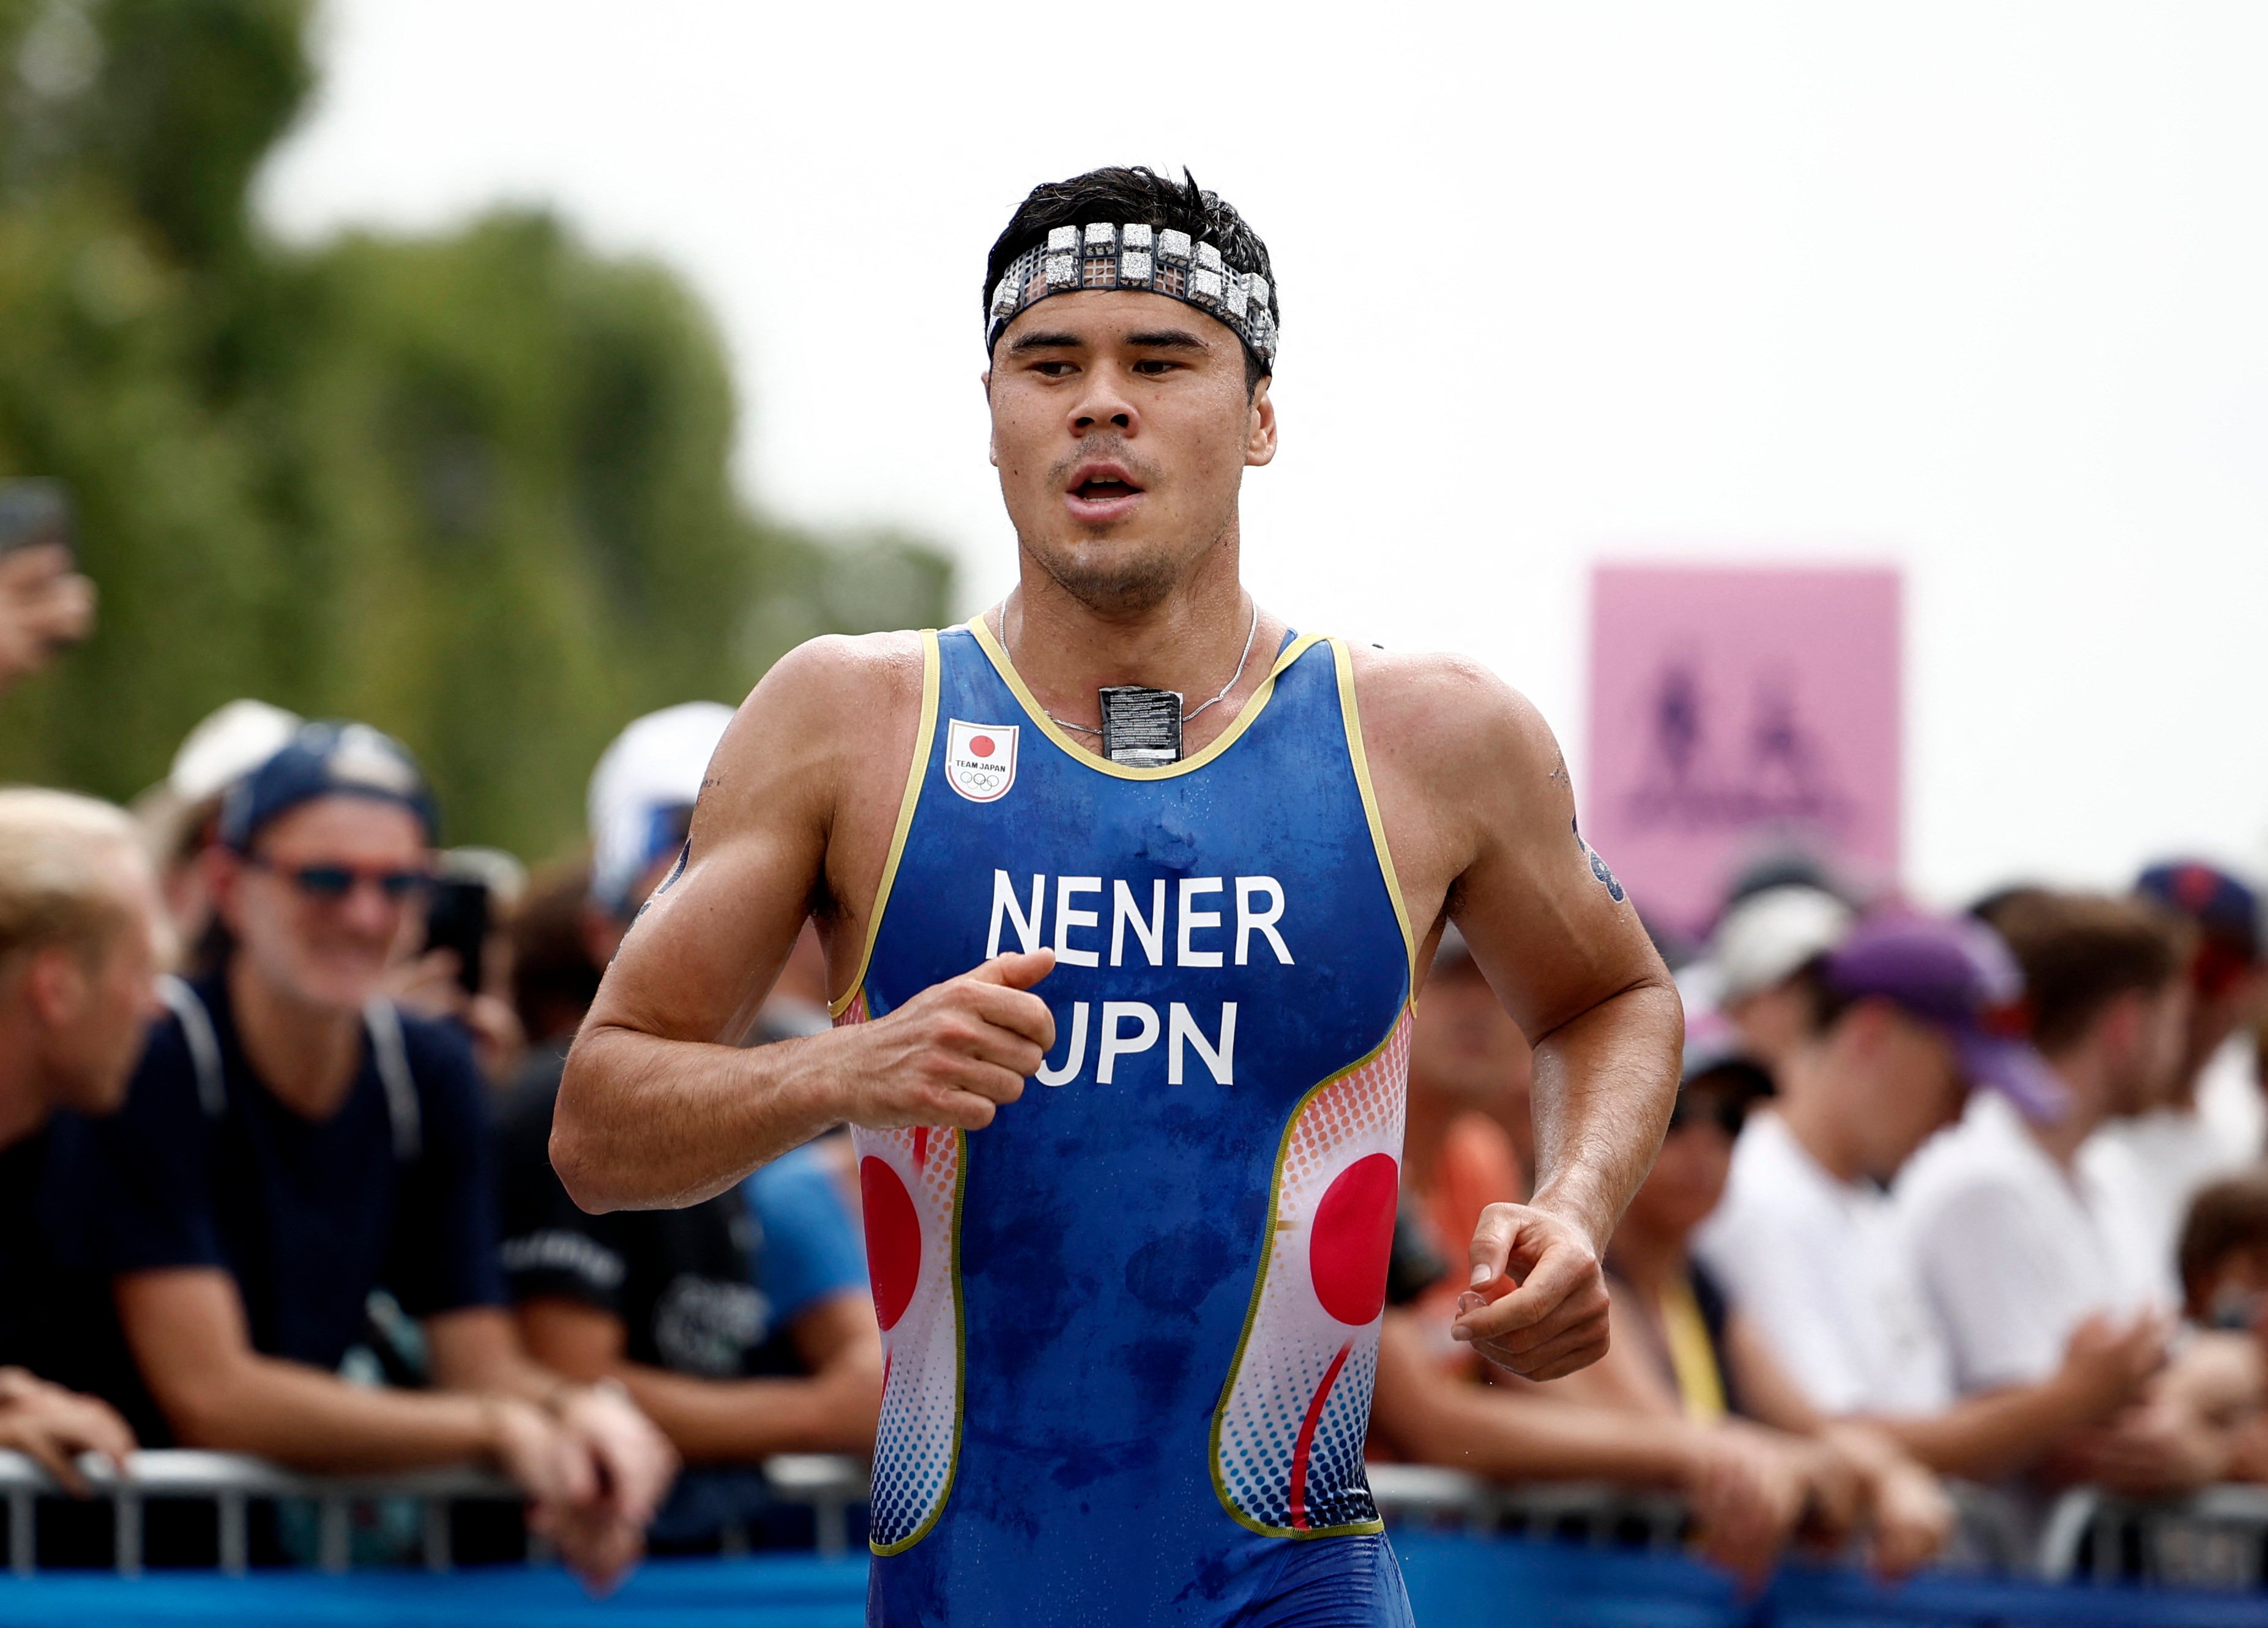 Kenji Nener believes triathlon in Asia has a long way to go to match standards elsewhere. Photo: Reuters.